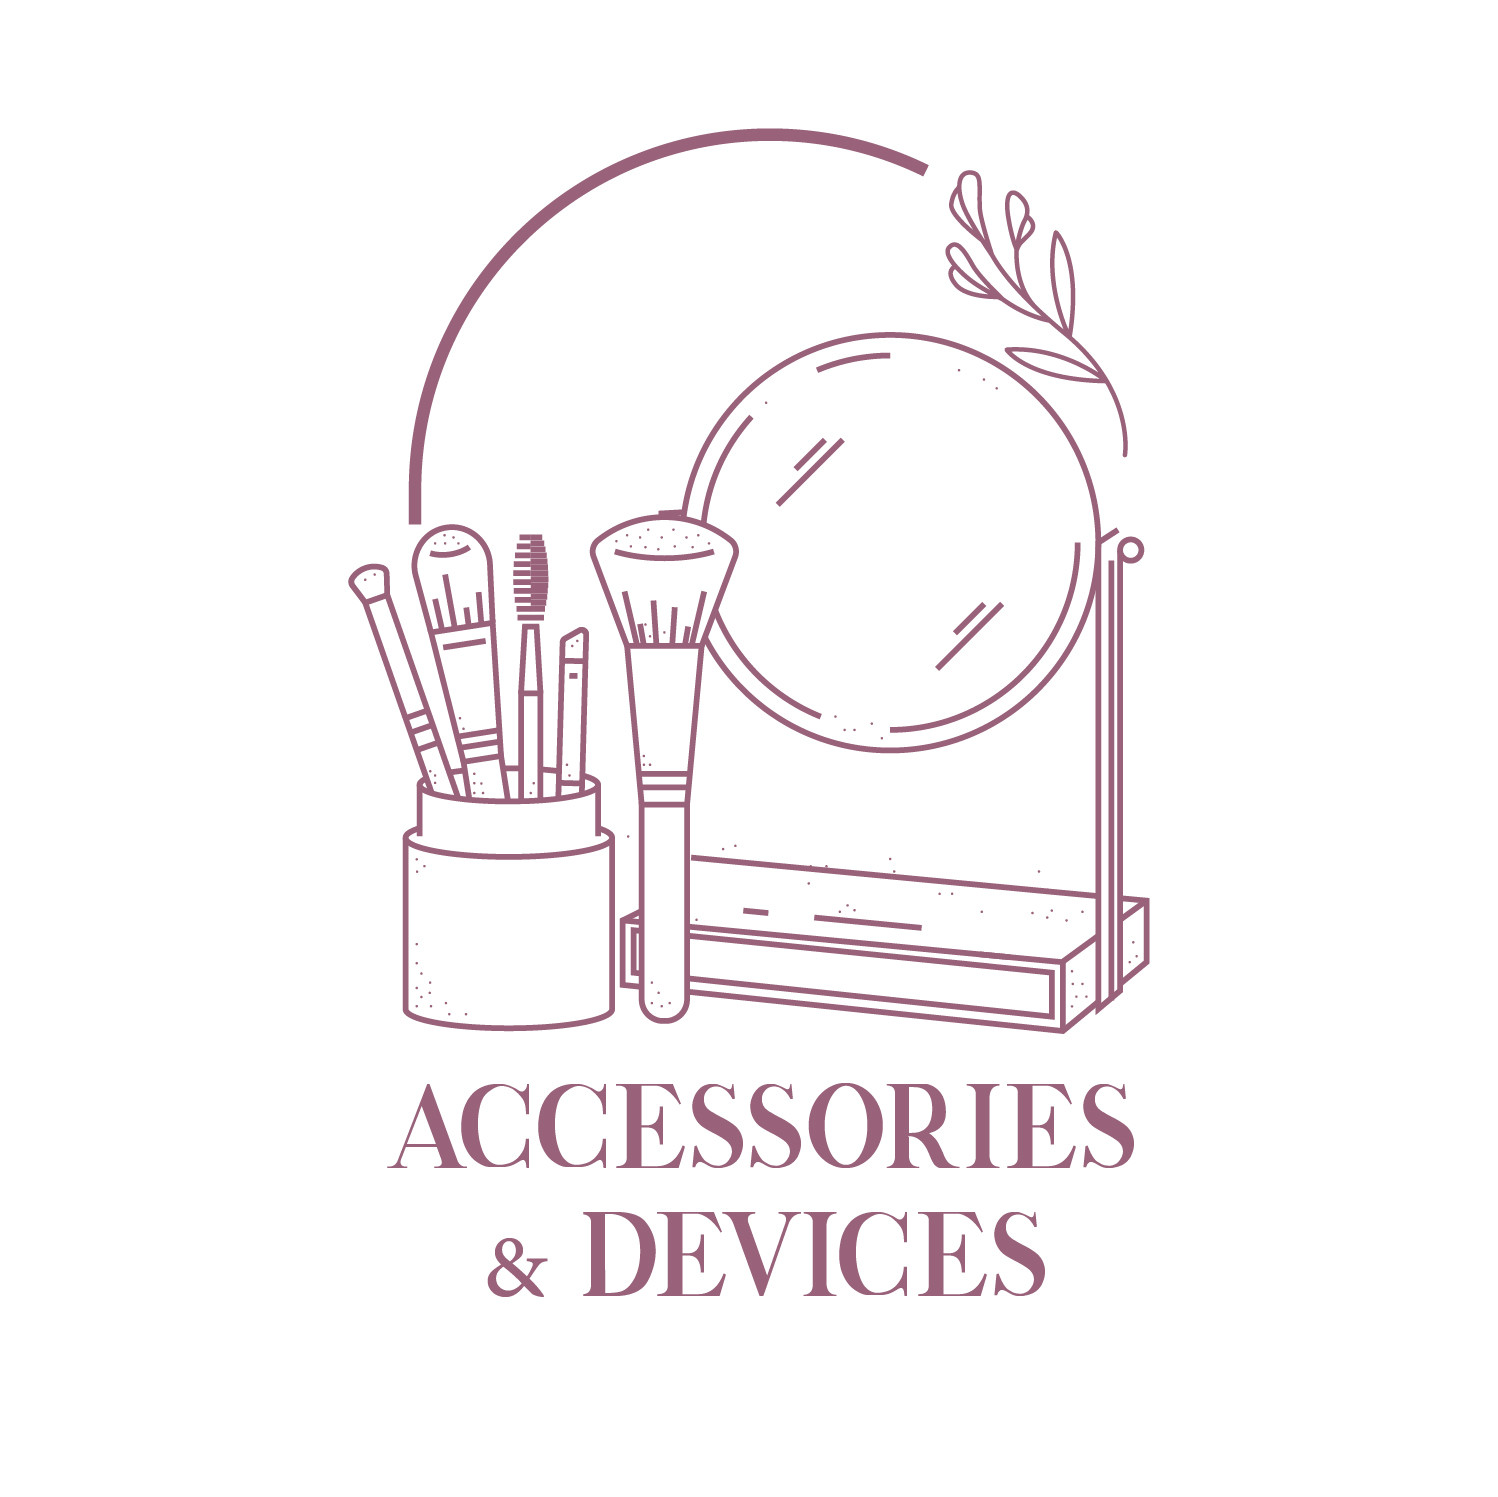 Accessories &devices